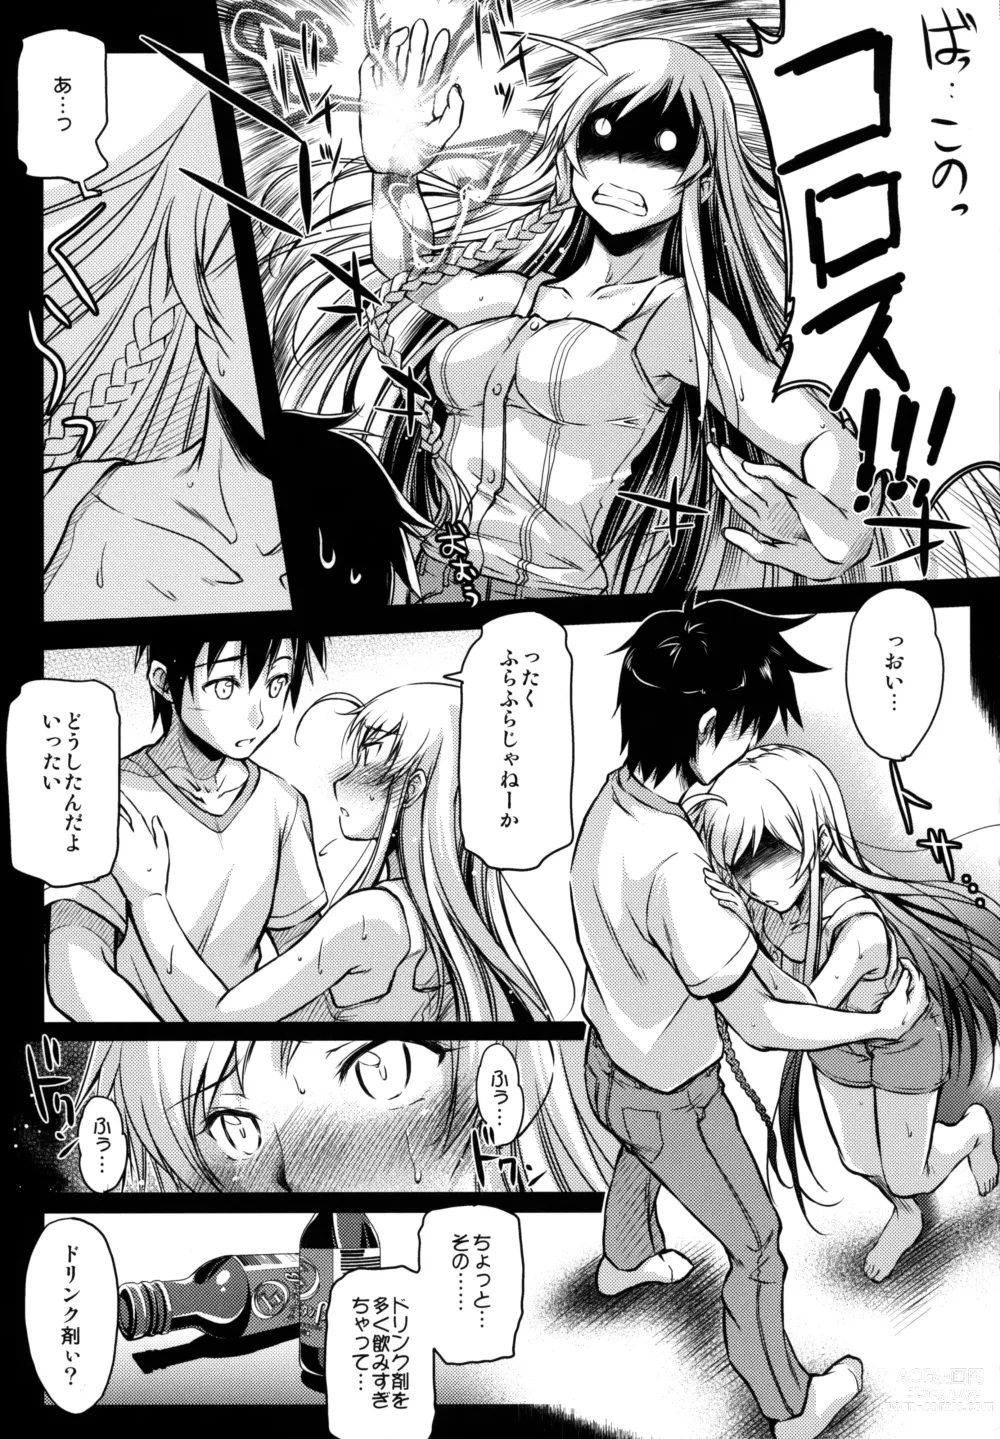 Page 6 of doujinshi Holy∞